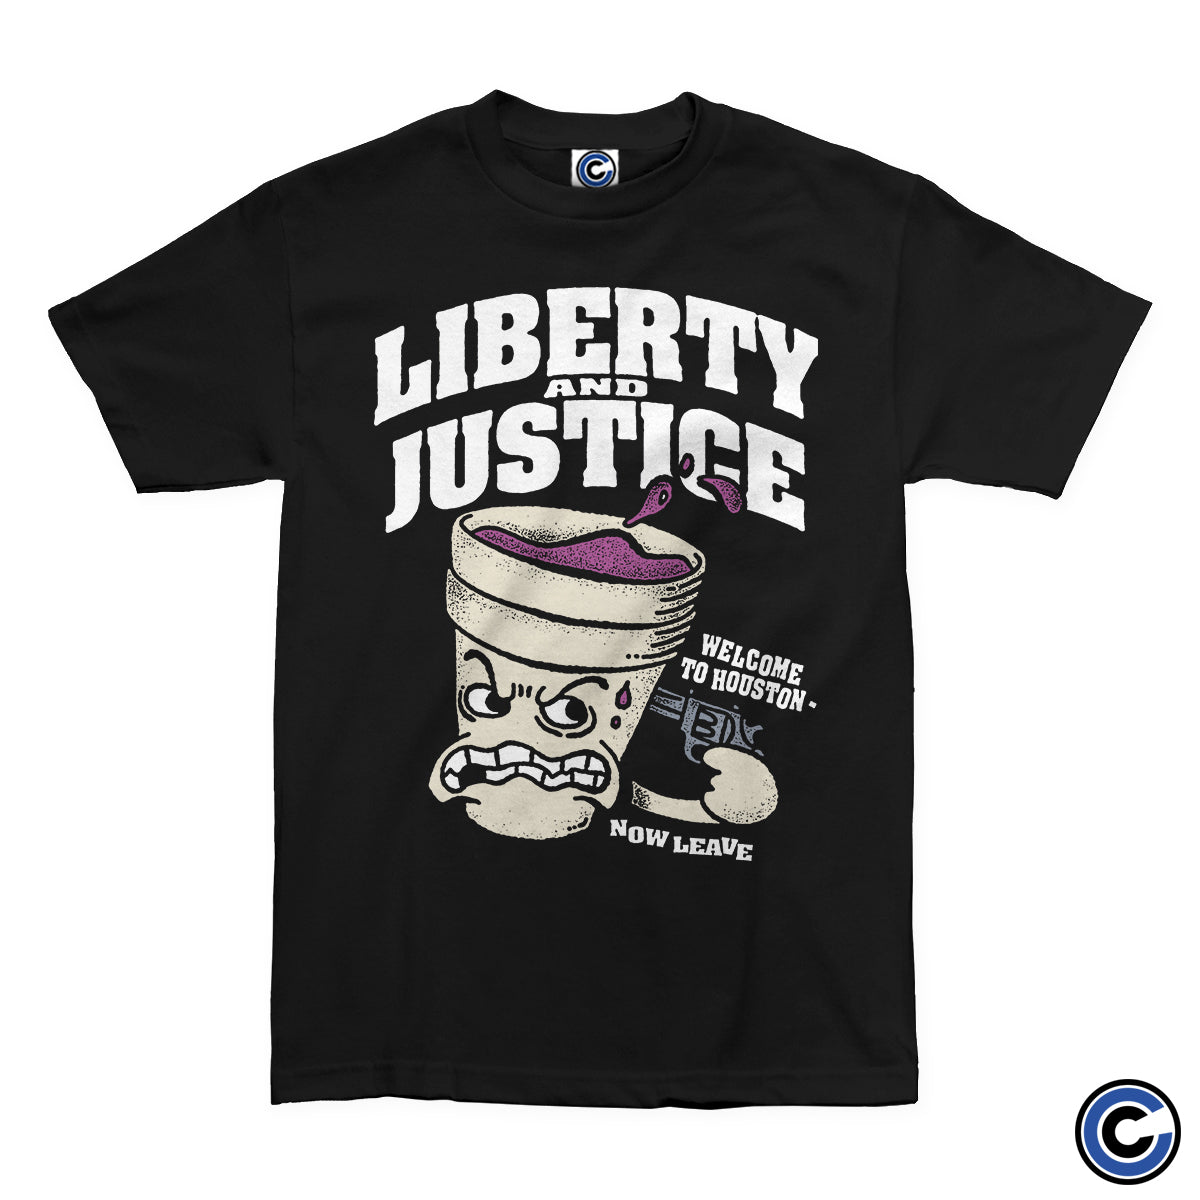 Liberty and Justice "H Town" Shirt